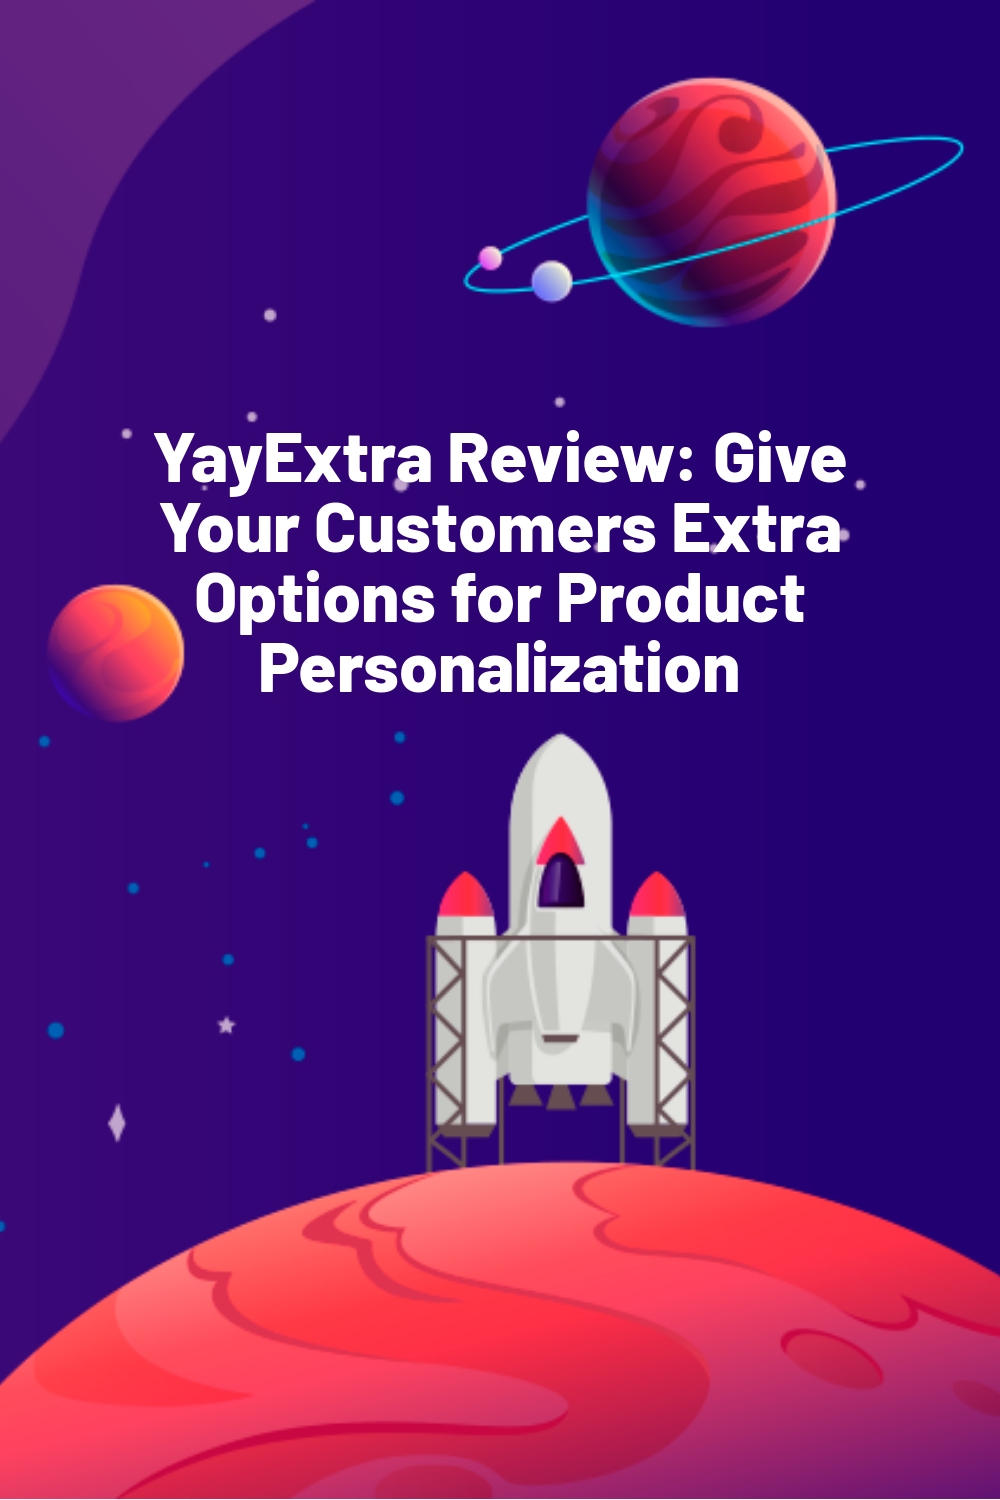 YayExtra Review: Give Your Customers Extra Options for Product Personalization